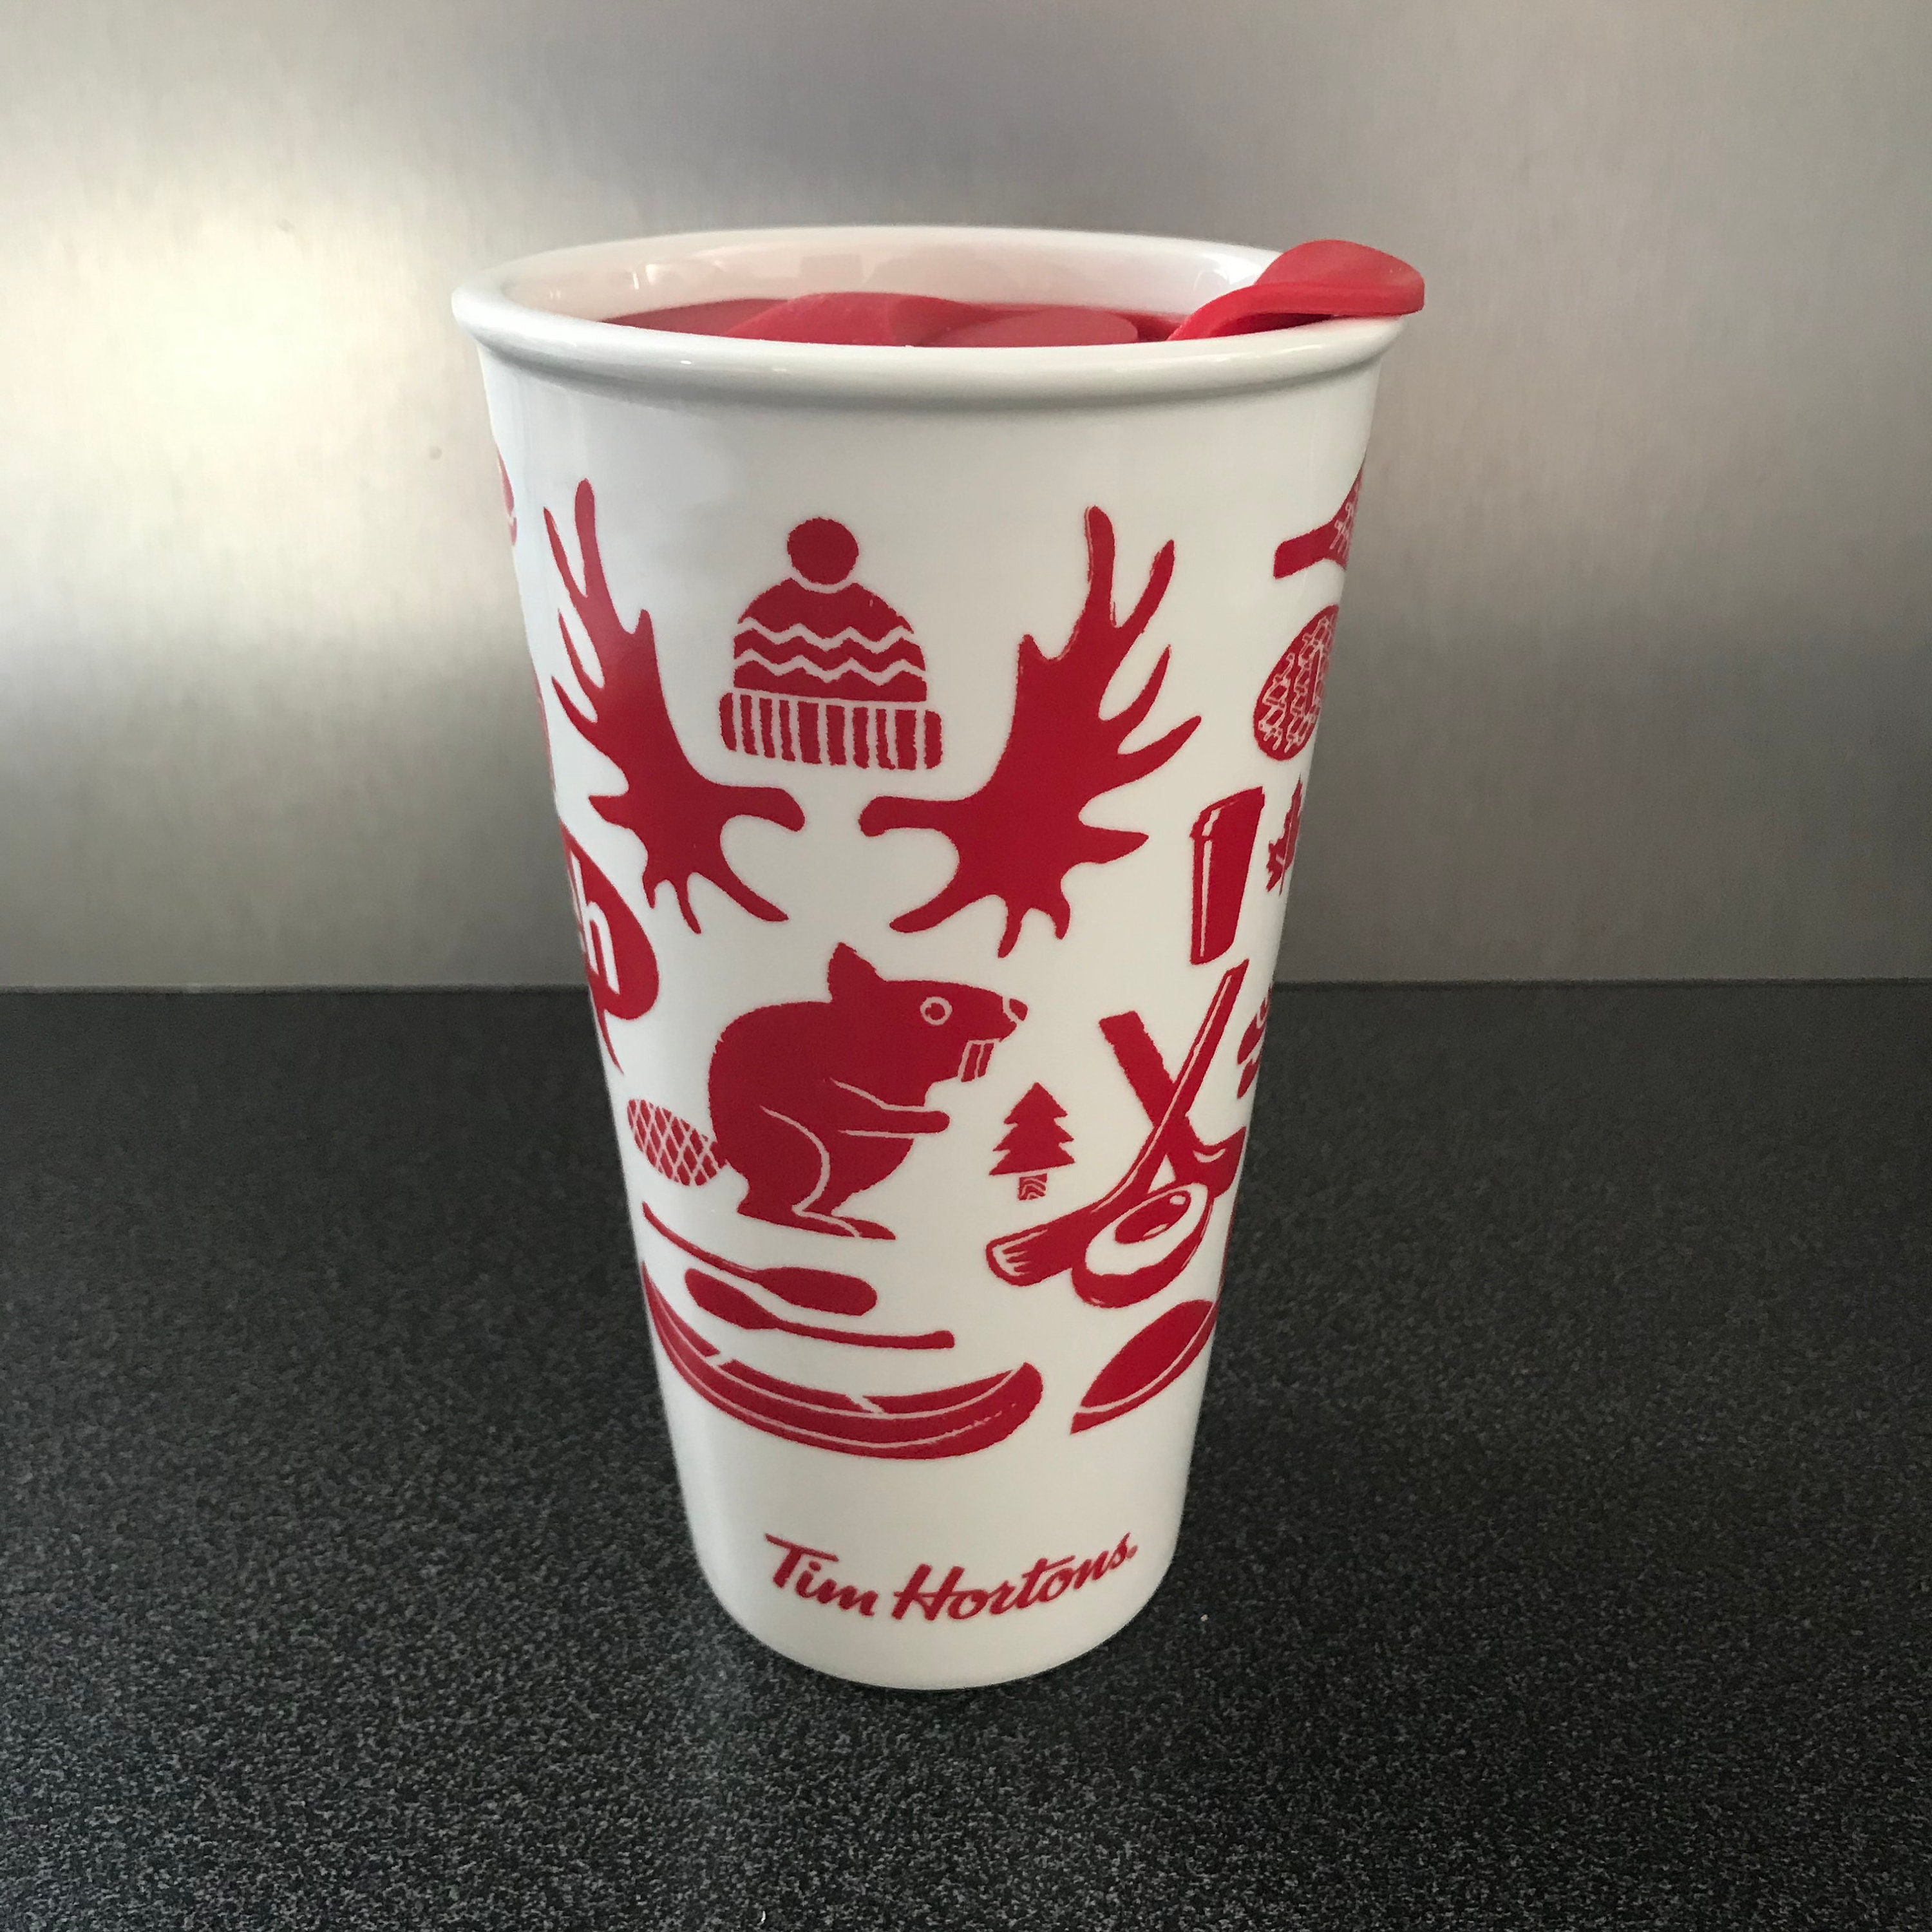 Tim Hortons Coffee Large Reusable Cup 18oz Travel Canada Red Maple